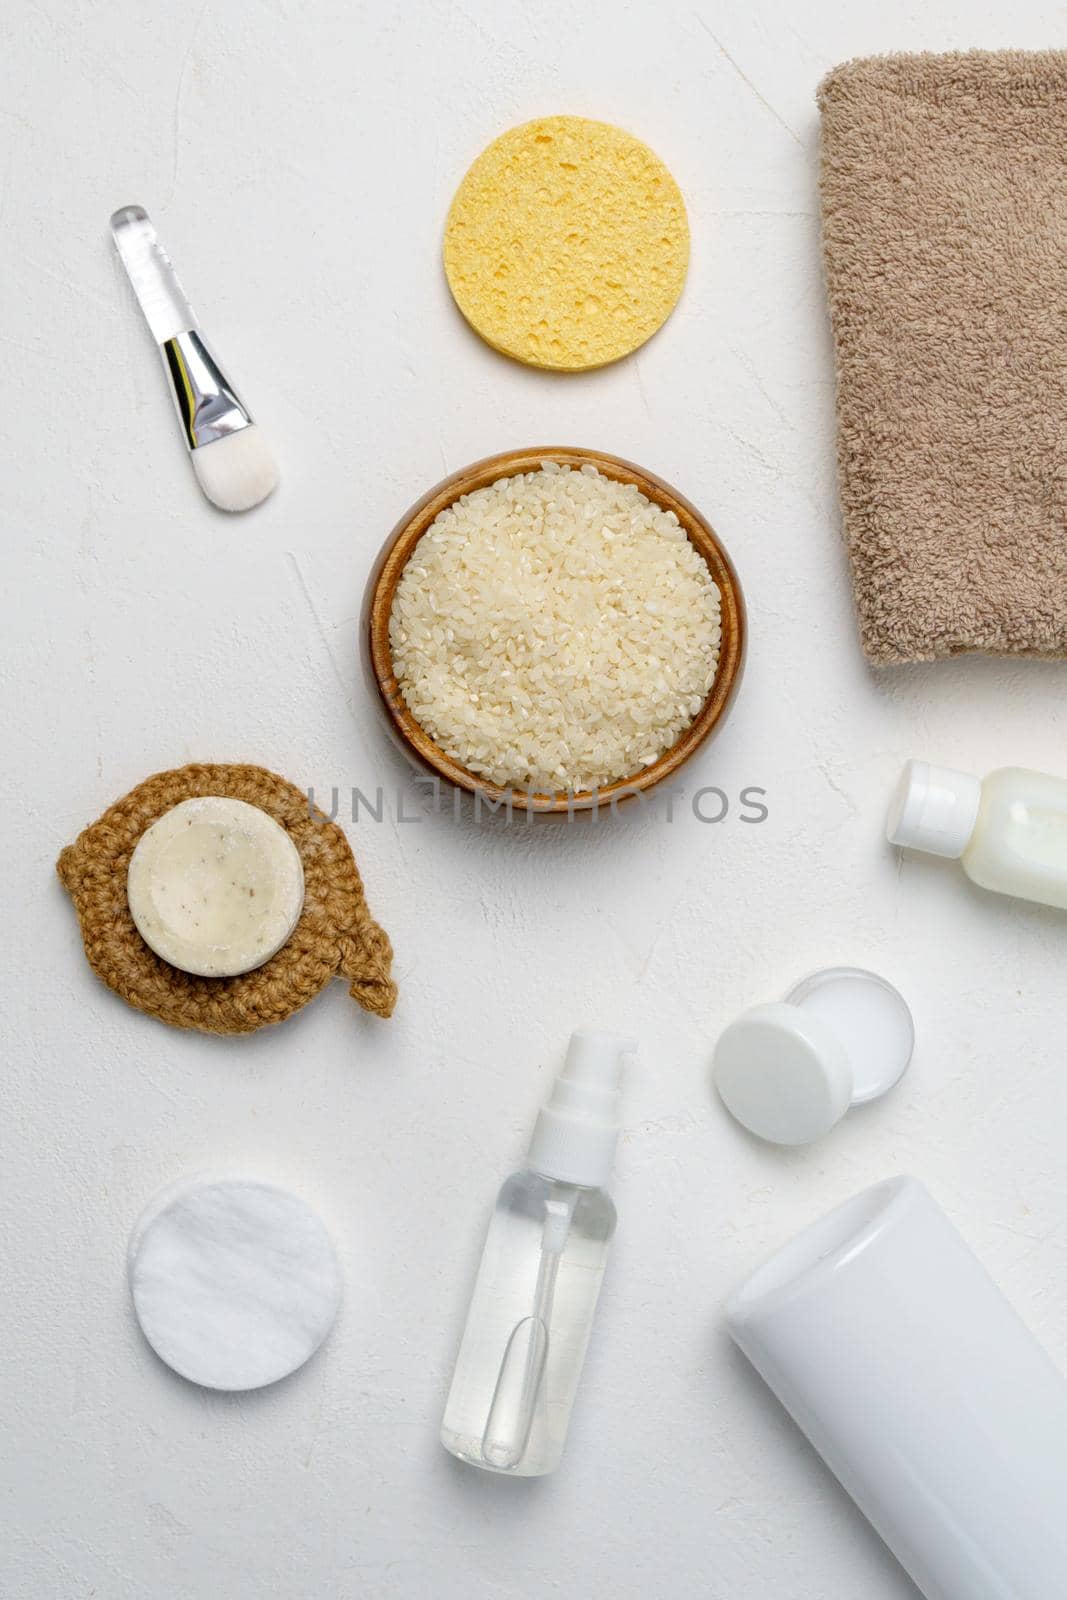 Rice for skin care face cleansing cosmetic product. Natural beauty treatment hygiene. Fermented beauty care concept. Vertical photo